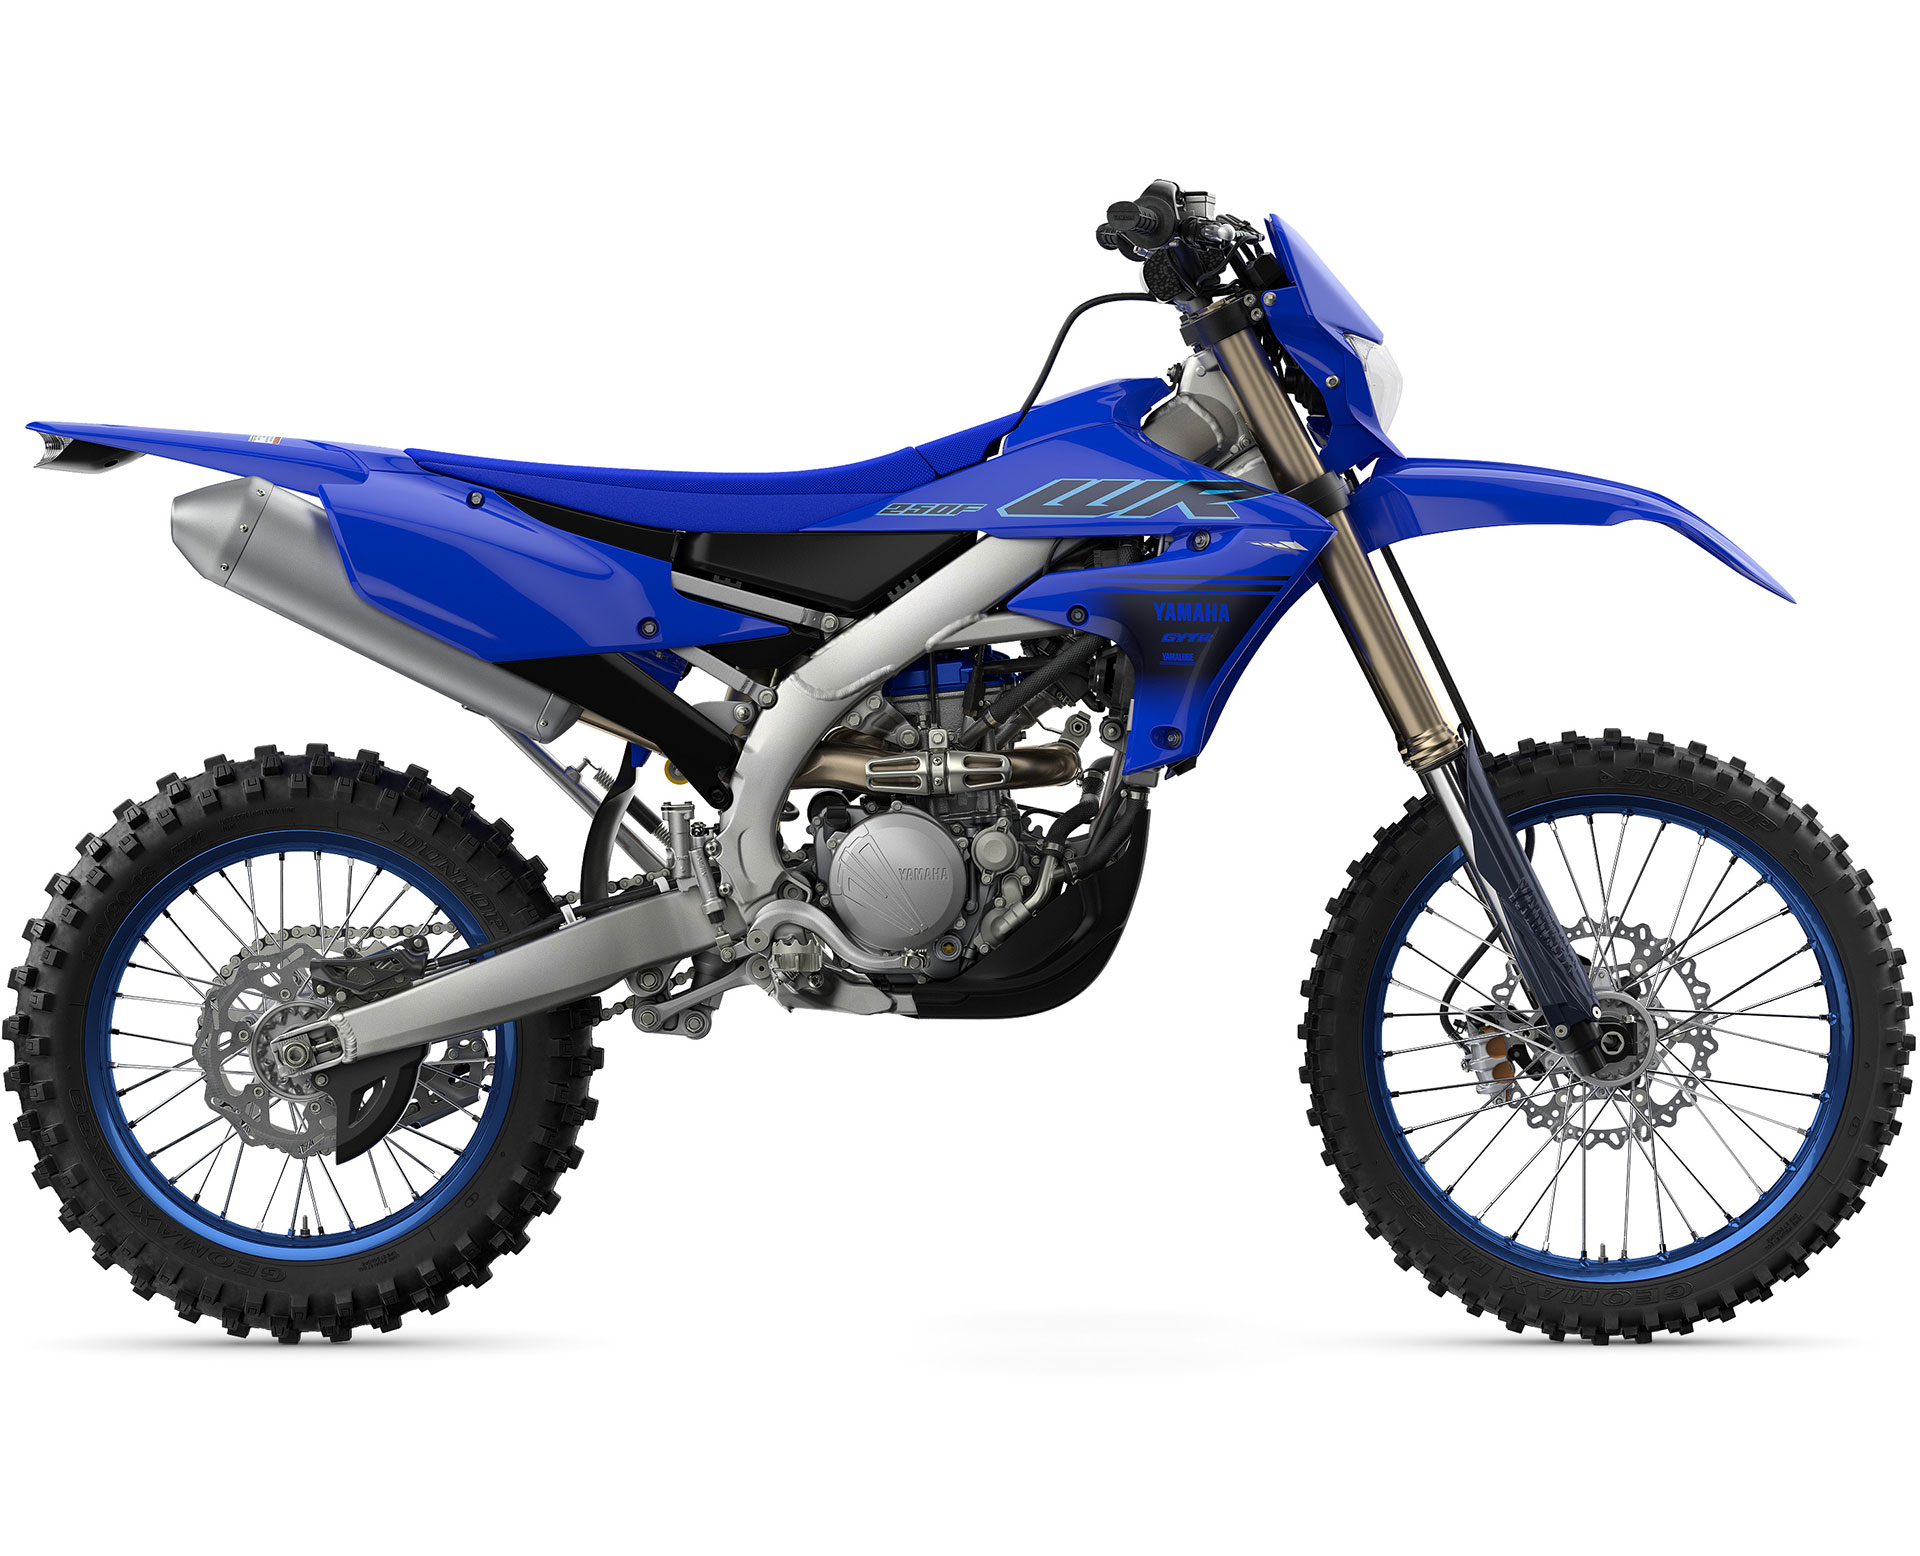 Thumbnail of your customized WR250F 2024